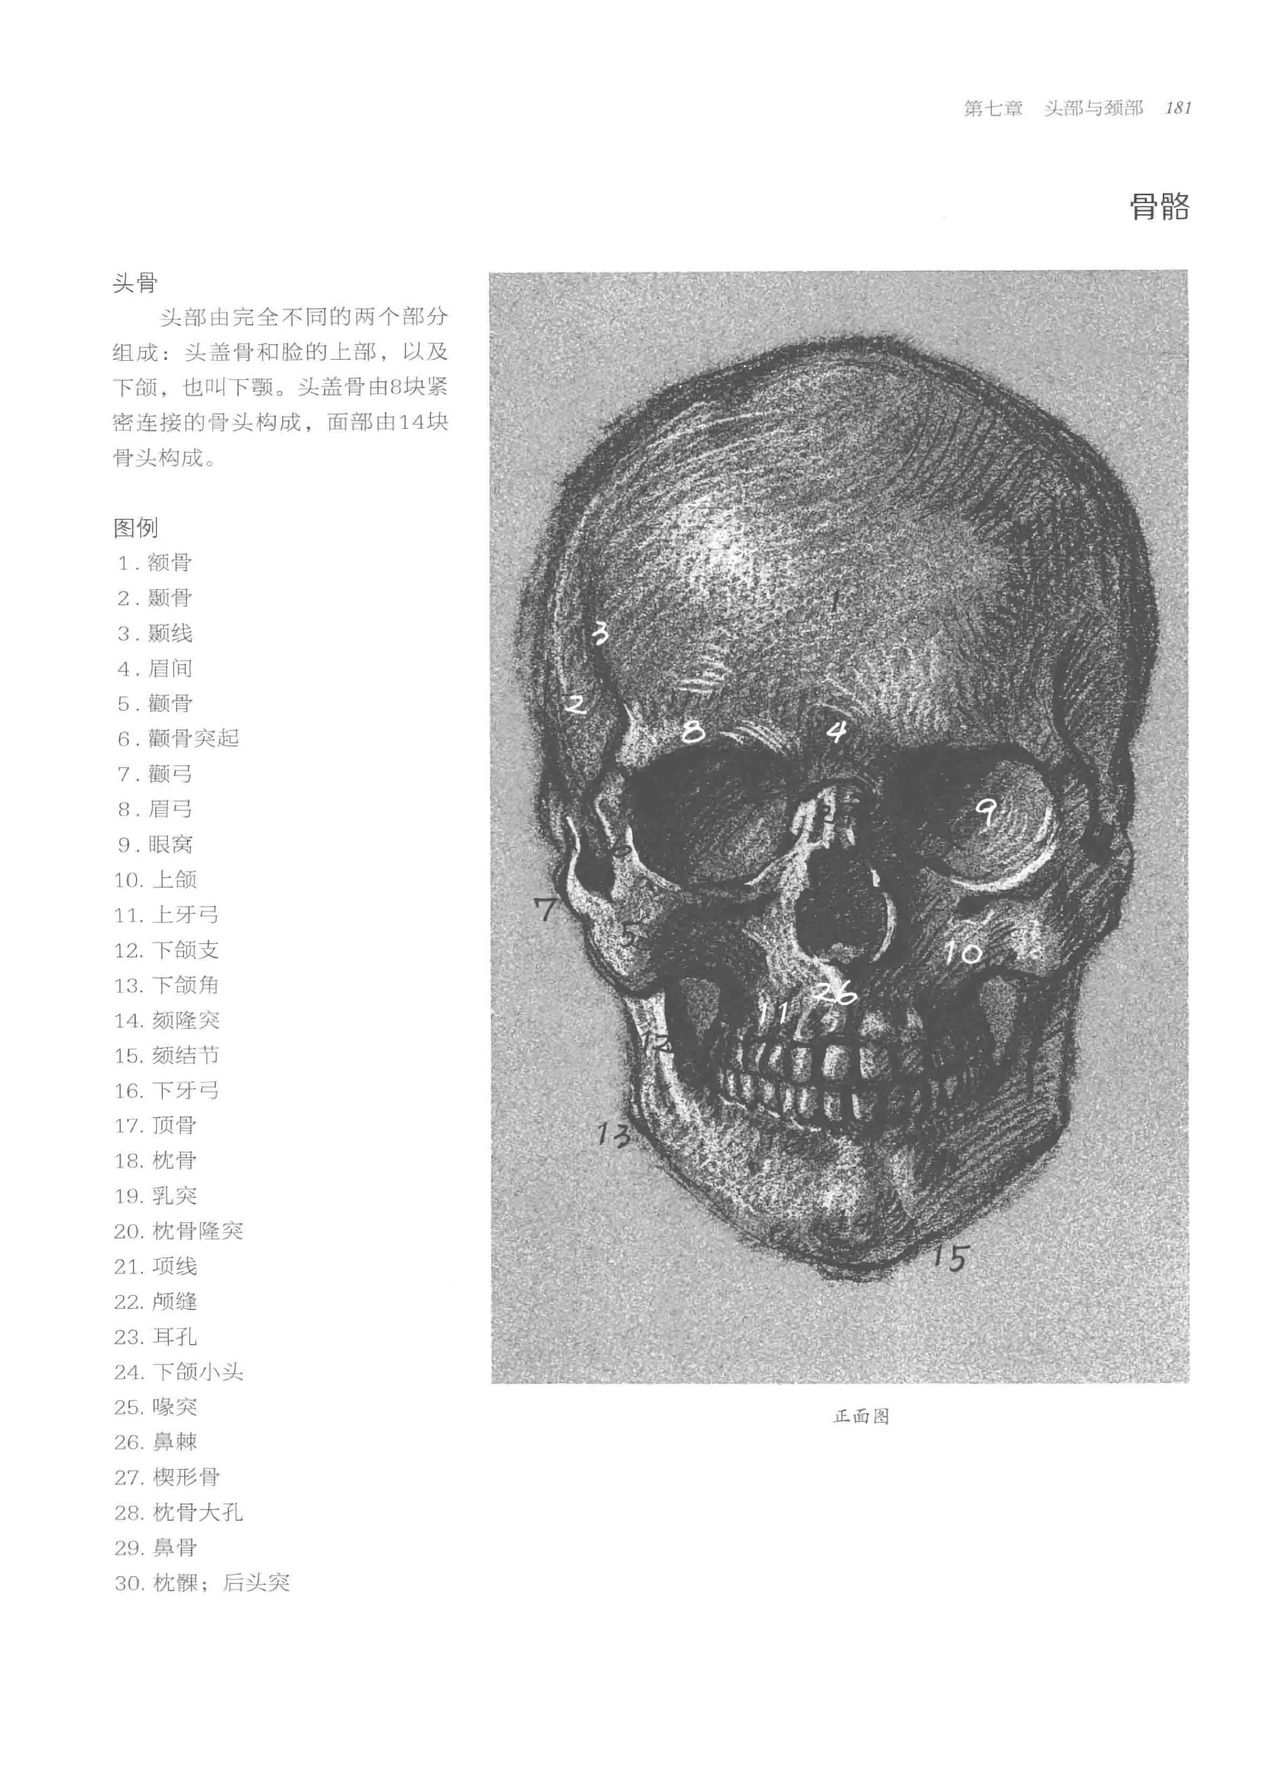 Anatomy-A Complete Guide for Artists - Joseph Sheppard [Chinese] 181